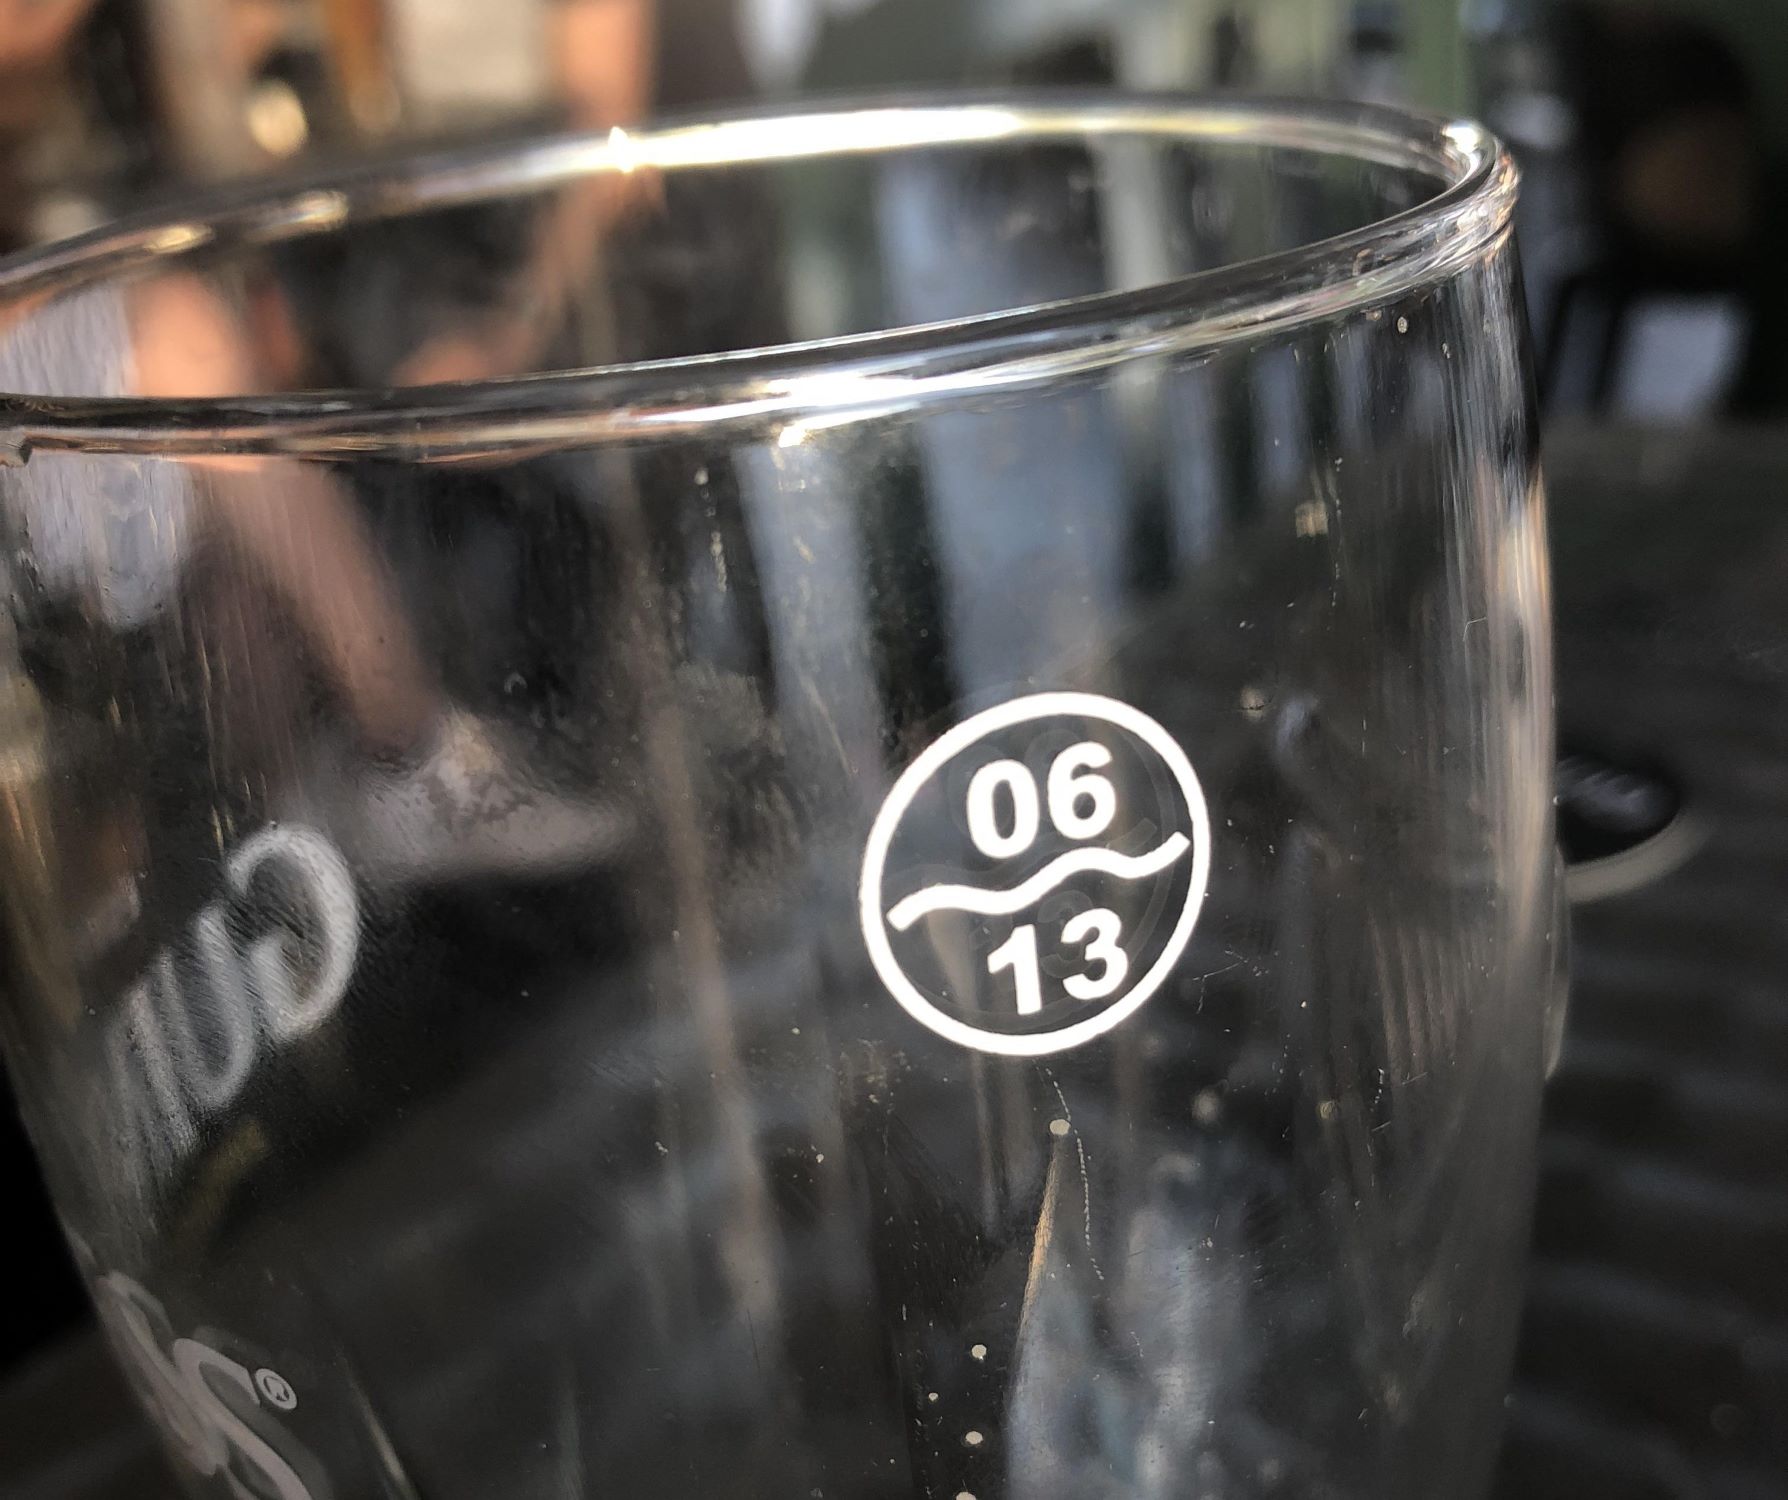 What Does “06 13” Mean On A Guinness Glass